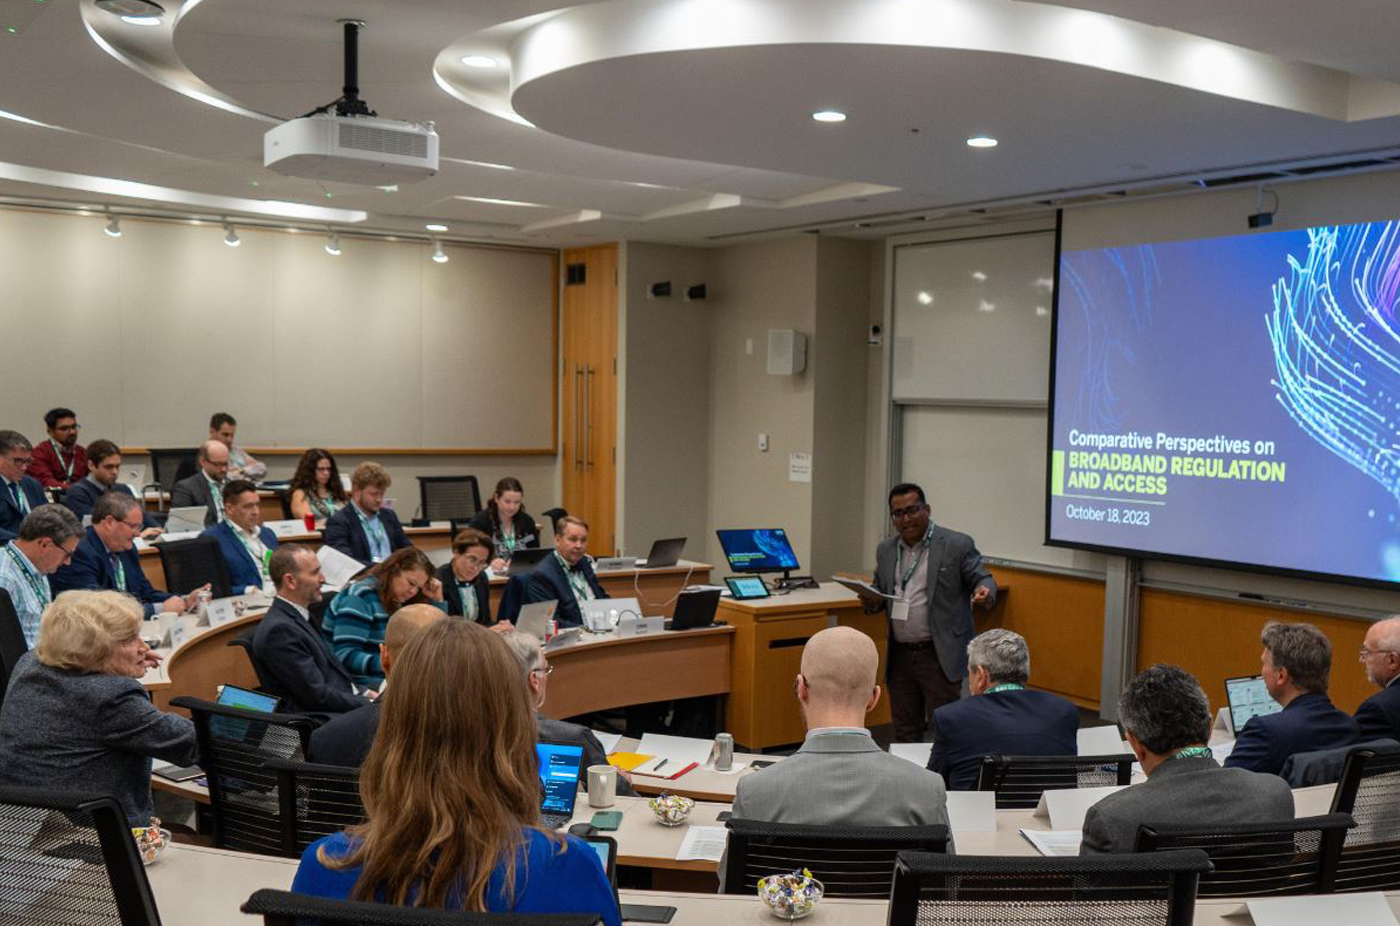 Romel Mostafa; Assistant Professor of Business, Economics, and Public Policy; speaking at a workshop  called Comparative Perspectives on Broadband Regulation and Access at Ivey’s Toronto campus in October 2023.